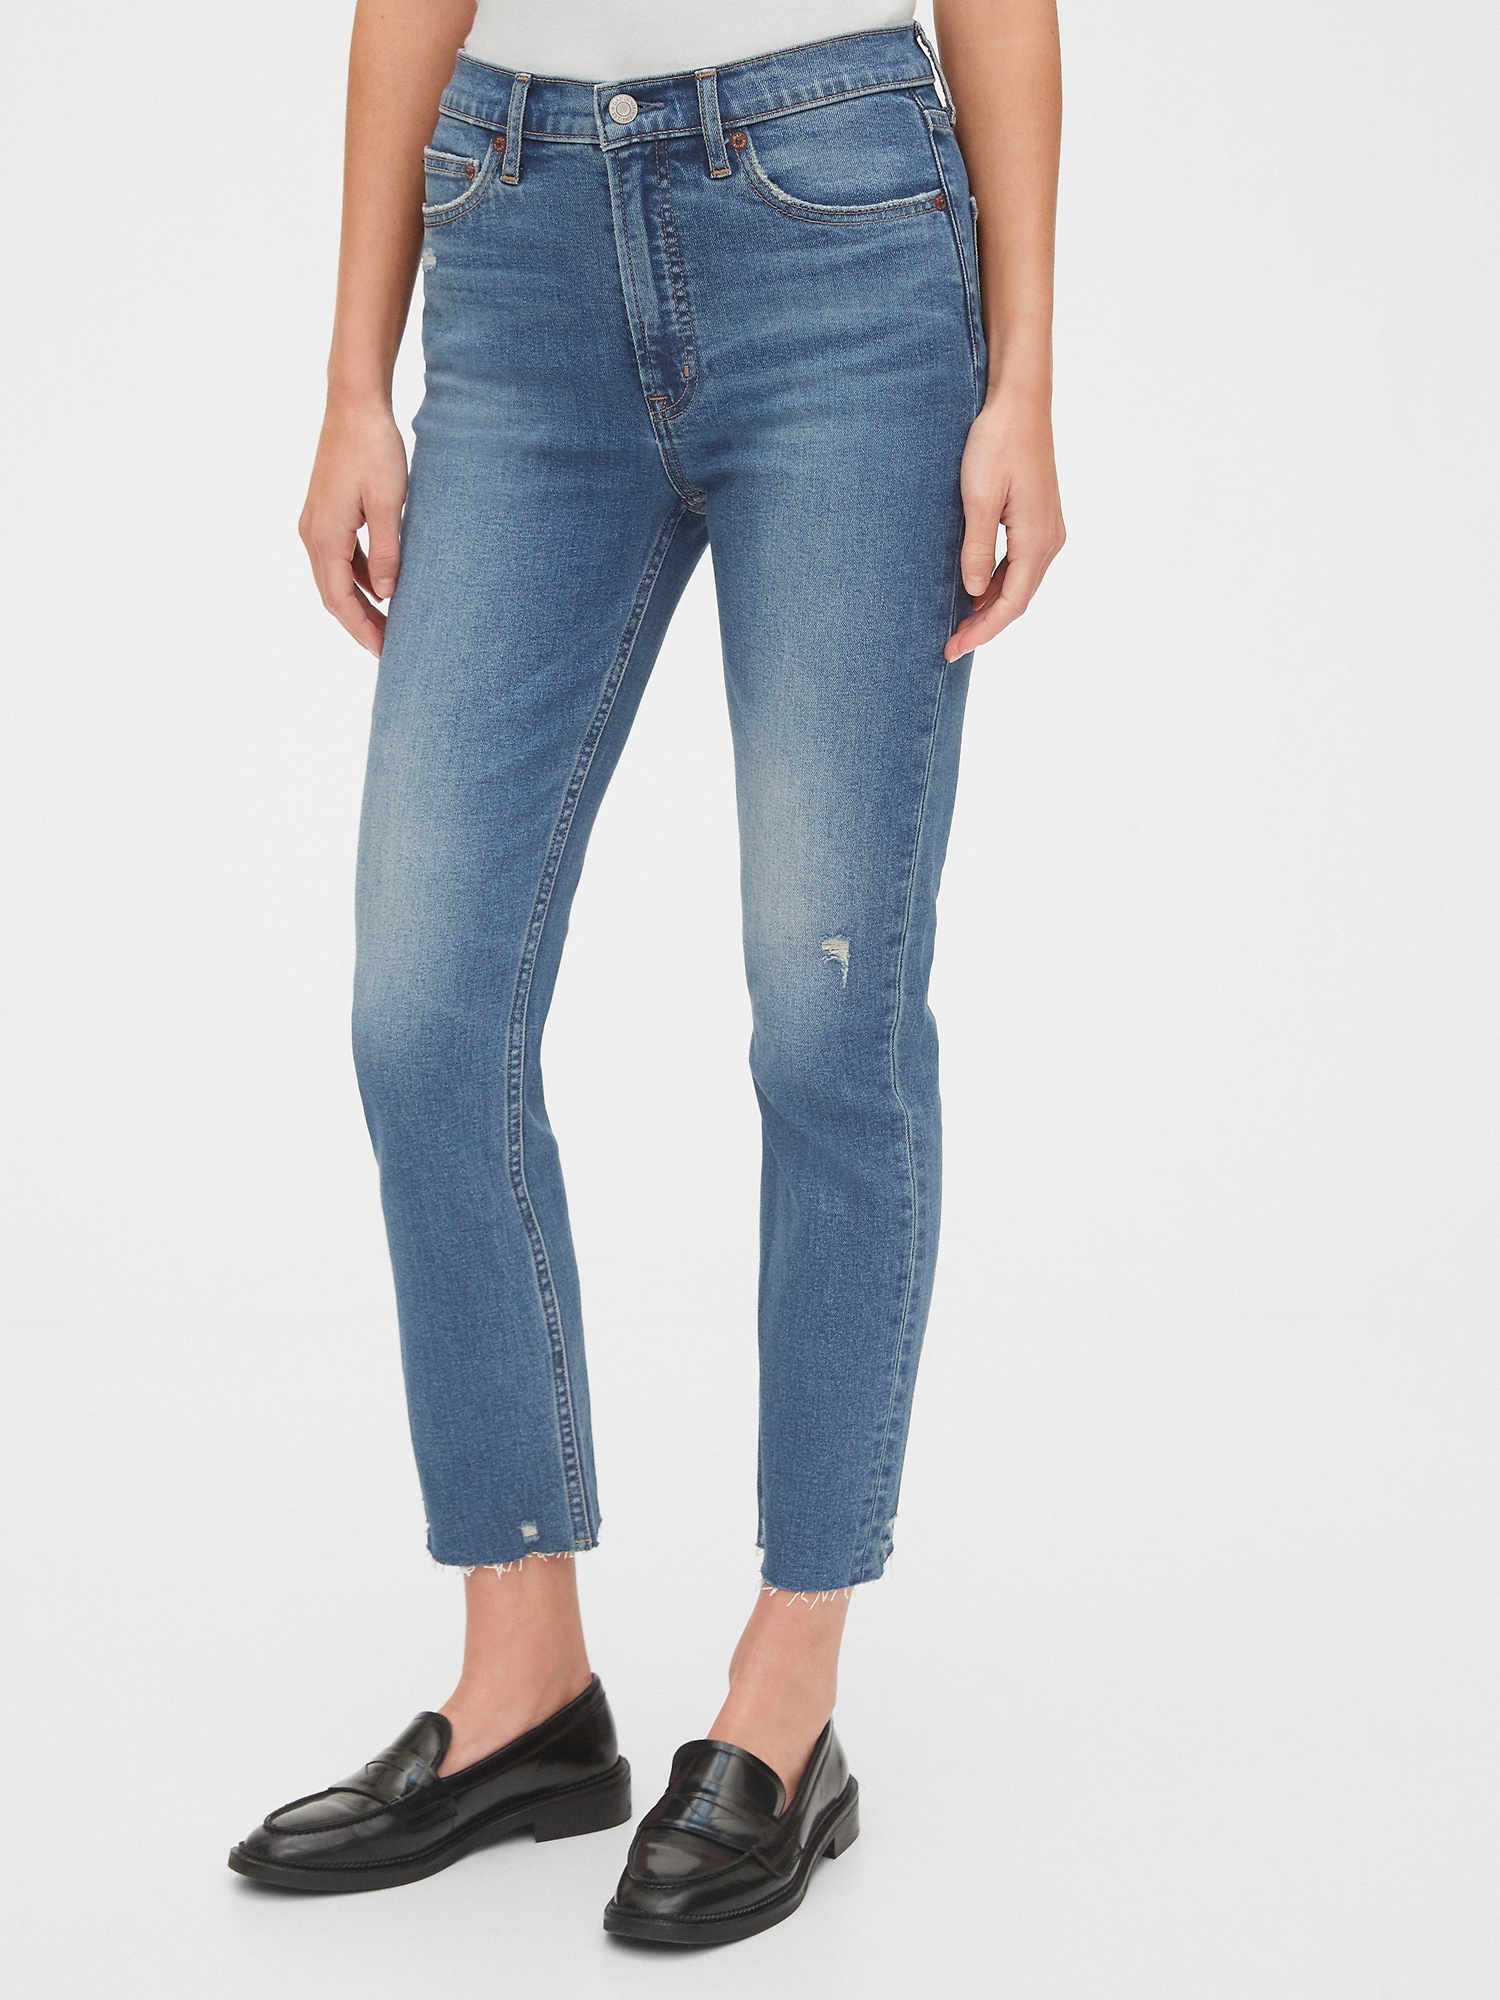 jeans from gap